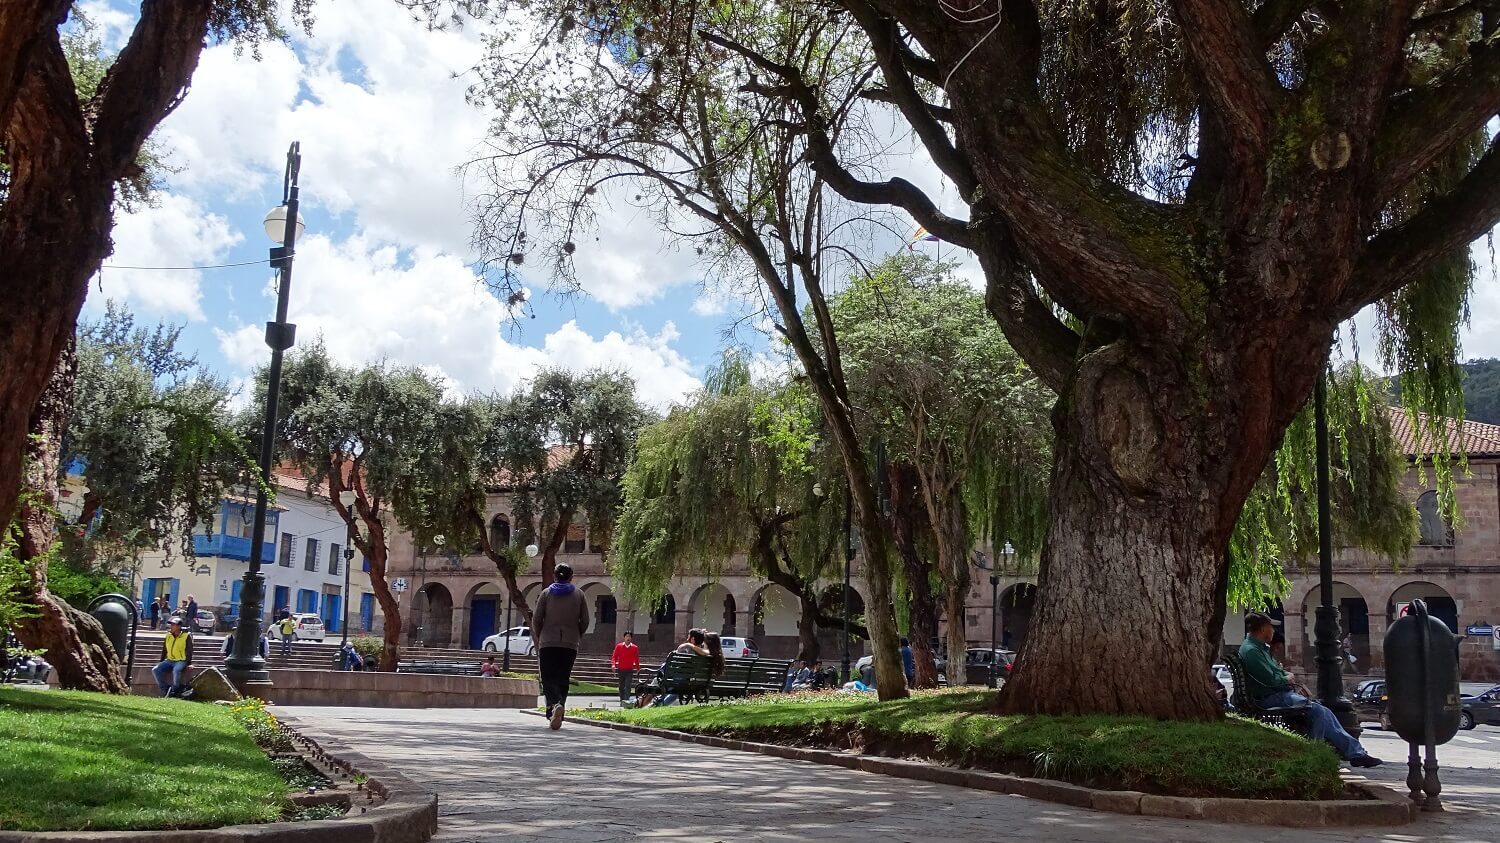 Plaza Regocijo or Plaza Kusipata is a tranquil, green space next to the main square of Cusco. Visit Cusco alternatively with RESPONSible Travel Peru!